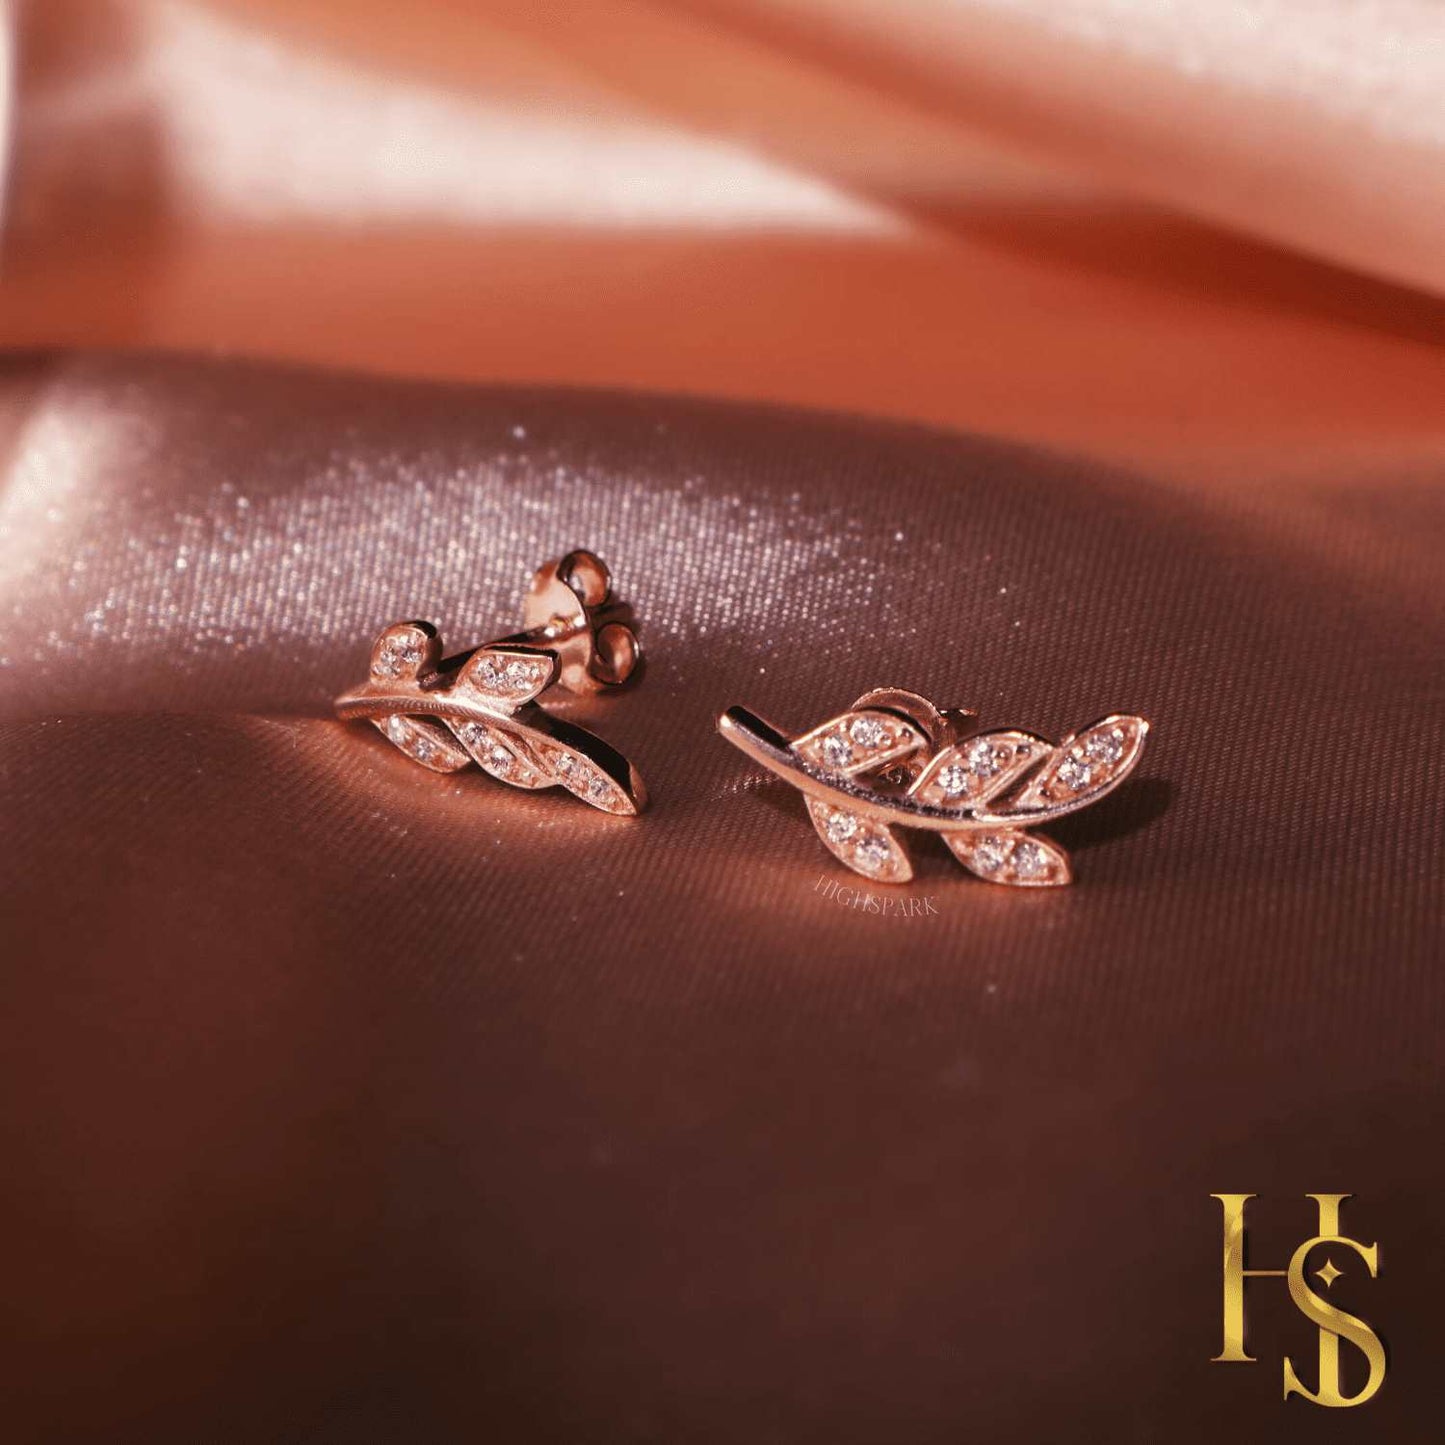 Minimal Rose Gold Leaf Earrings in 92.5 Silver studded with Swiss Zirconia - 18K Rose Gold Finish